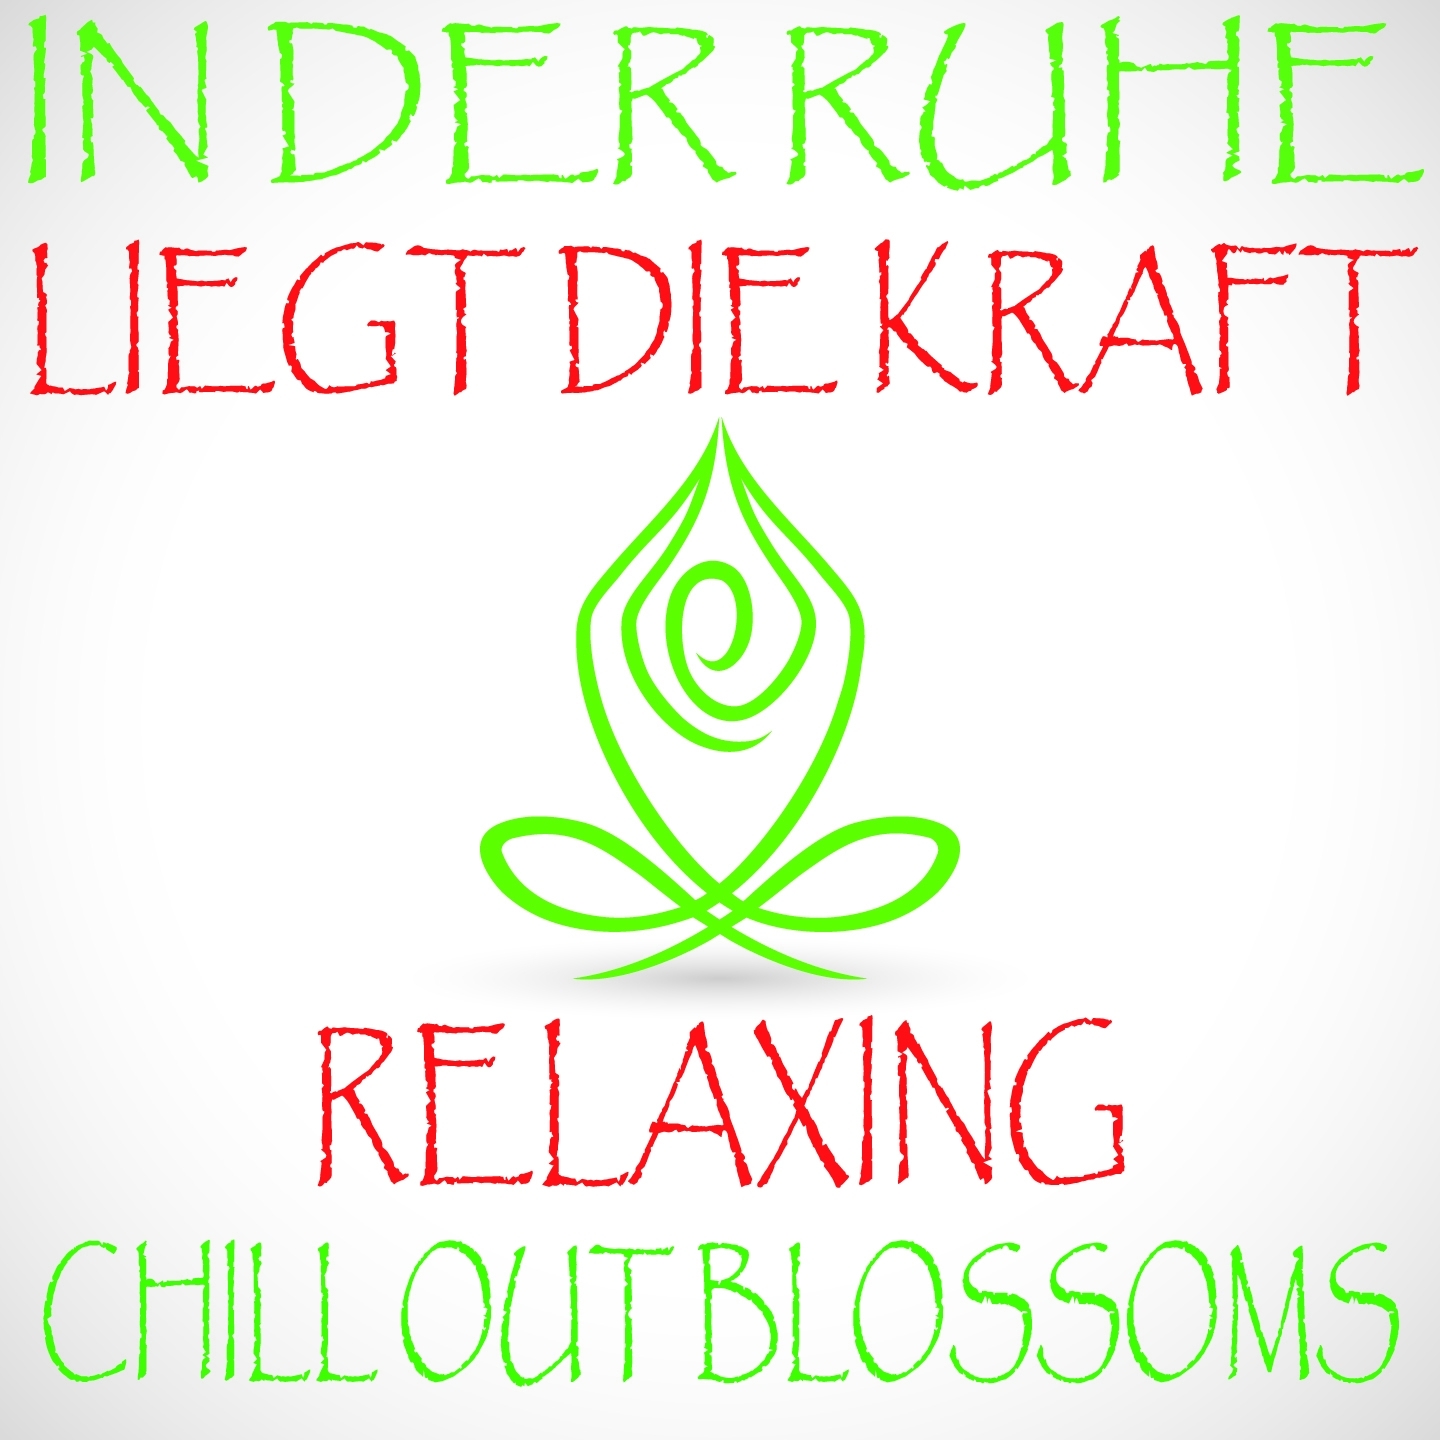 In der Ruhe liegt die Kraft (Relaxing Chill Out Blossoms)